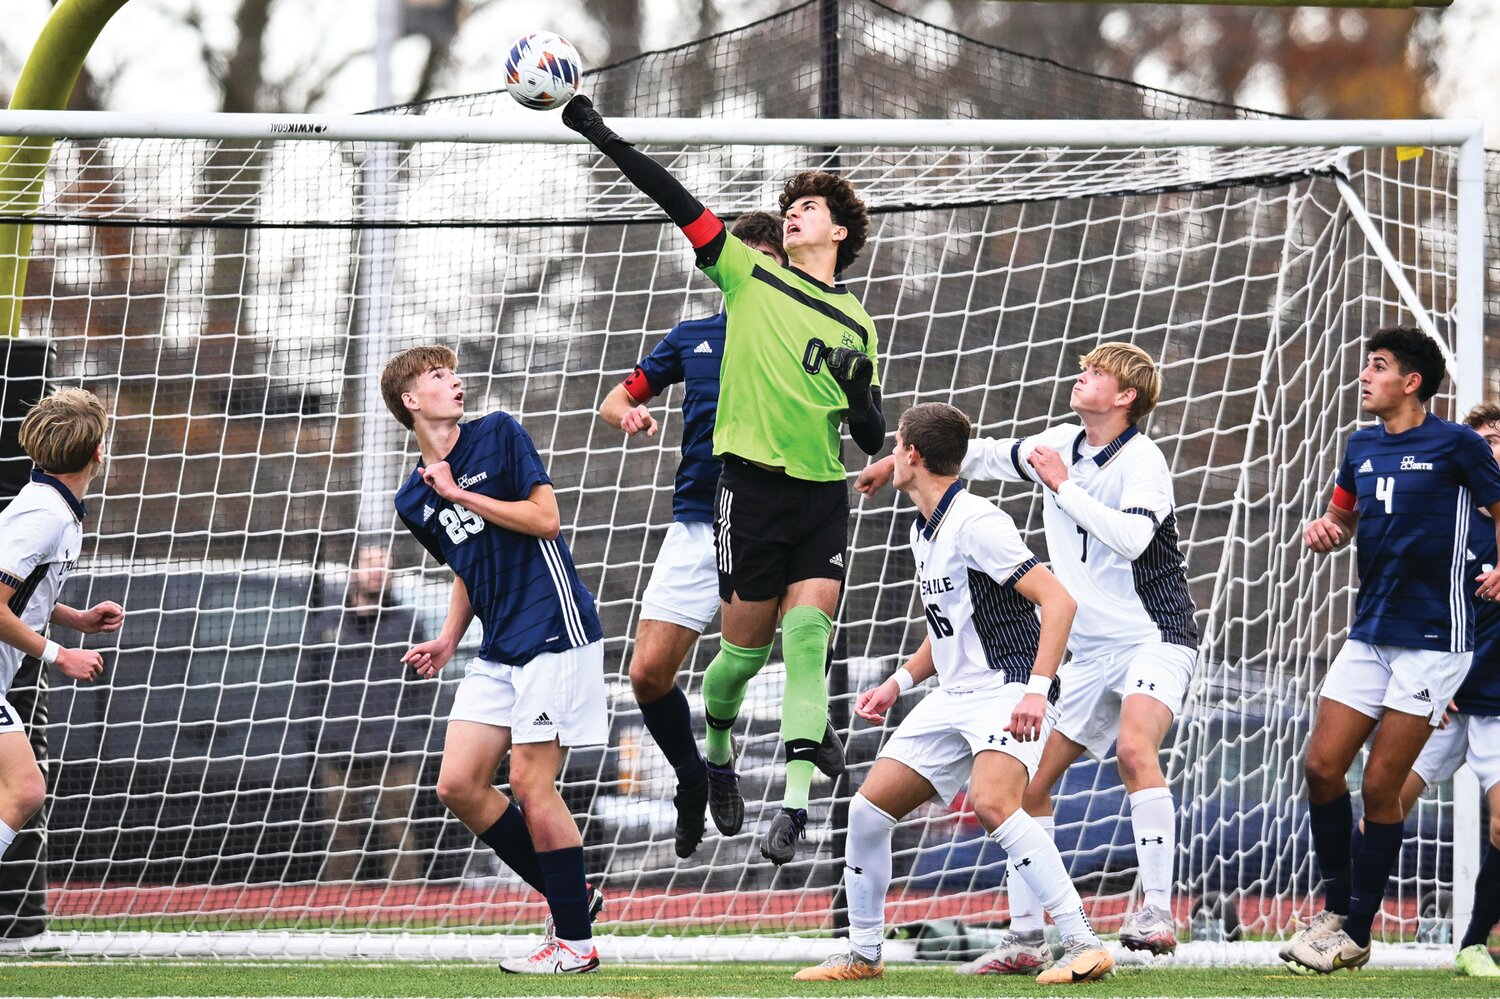 Council Rock North goalie Calvin Hopkins punches a corner kick away to make a save during the first half of Saturday’s PIAA quarterfinal game.